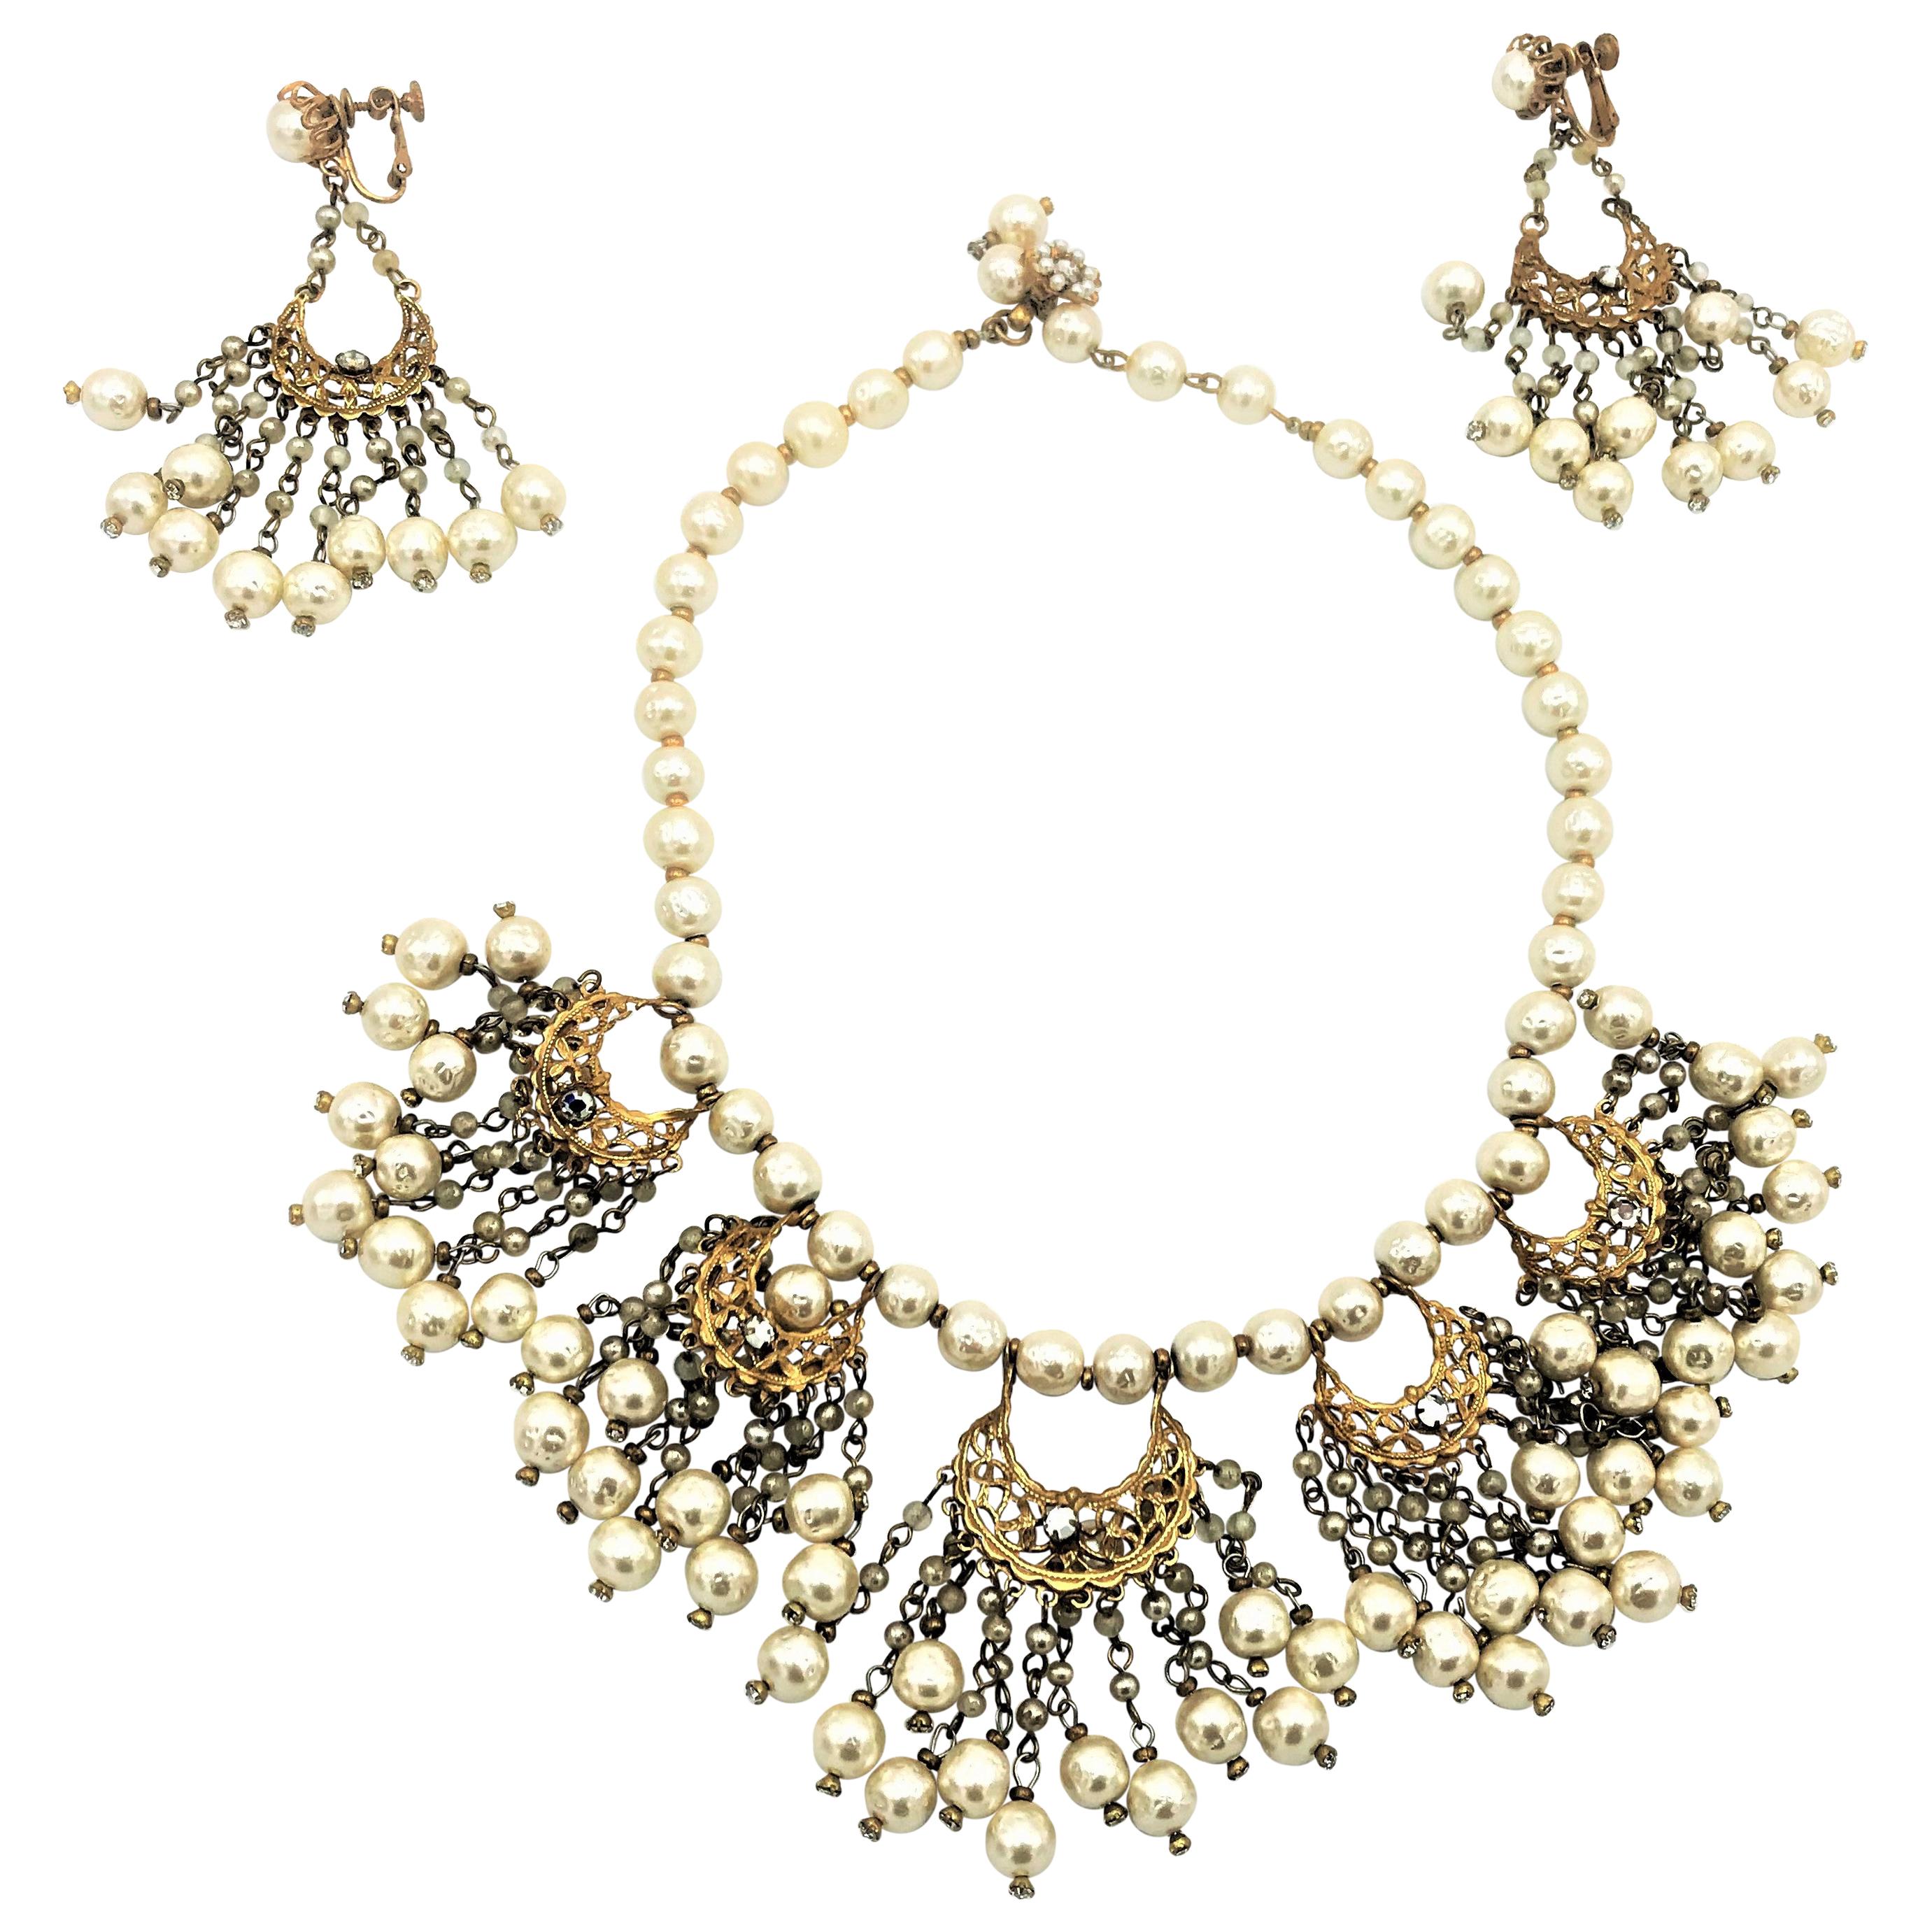 Vintage Miriam Haskell necklace with matching earrings gold plated 1950s